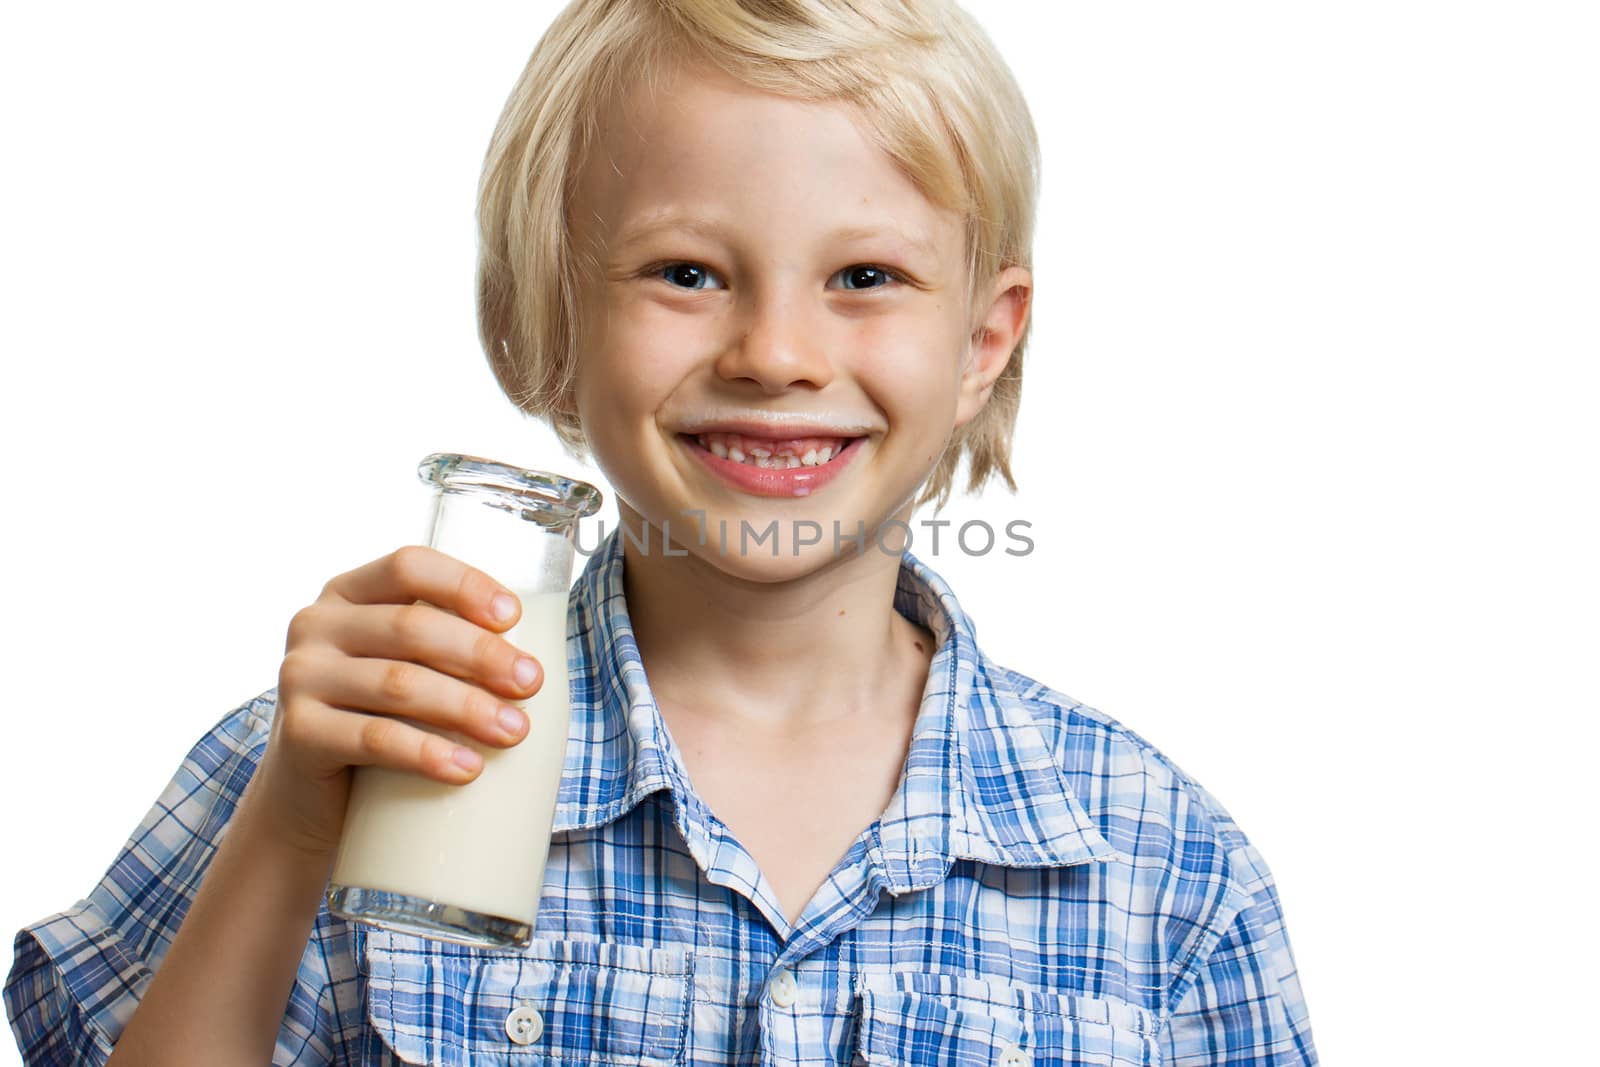 Close-up portrait of a happy cute boy with a bottle of milk and a milk moustache. Isolated on white.